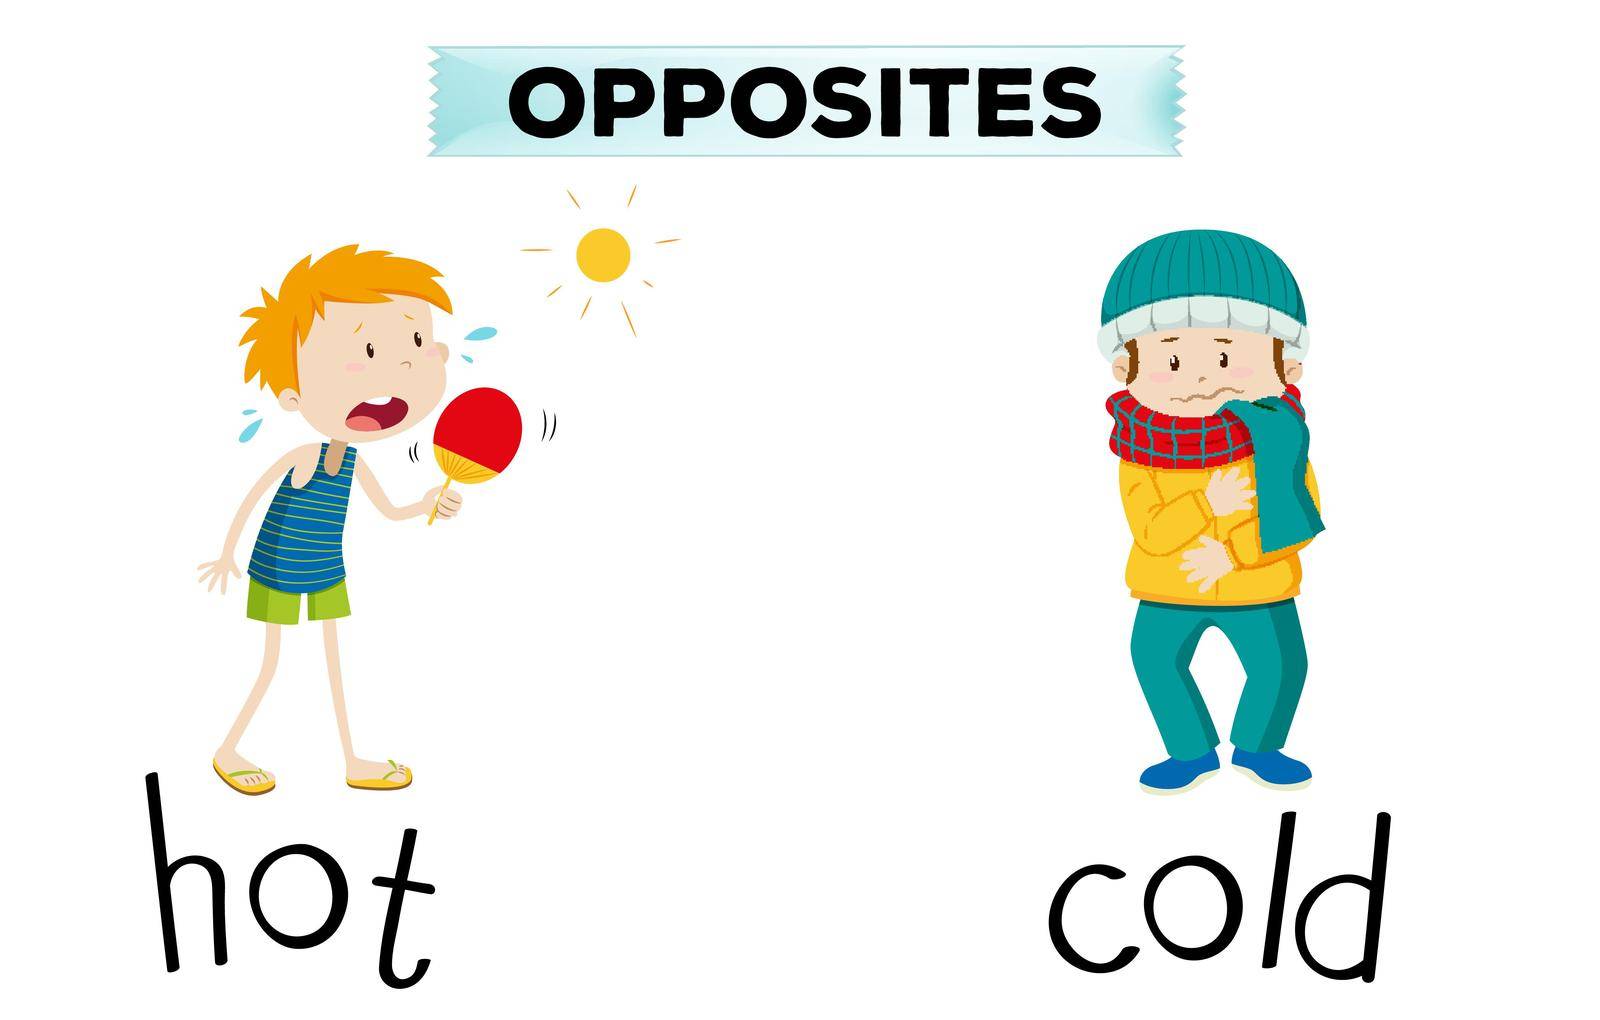 Opposite words for hot and cold by iimages